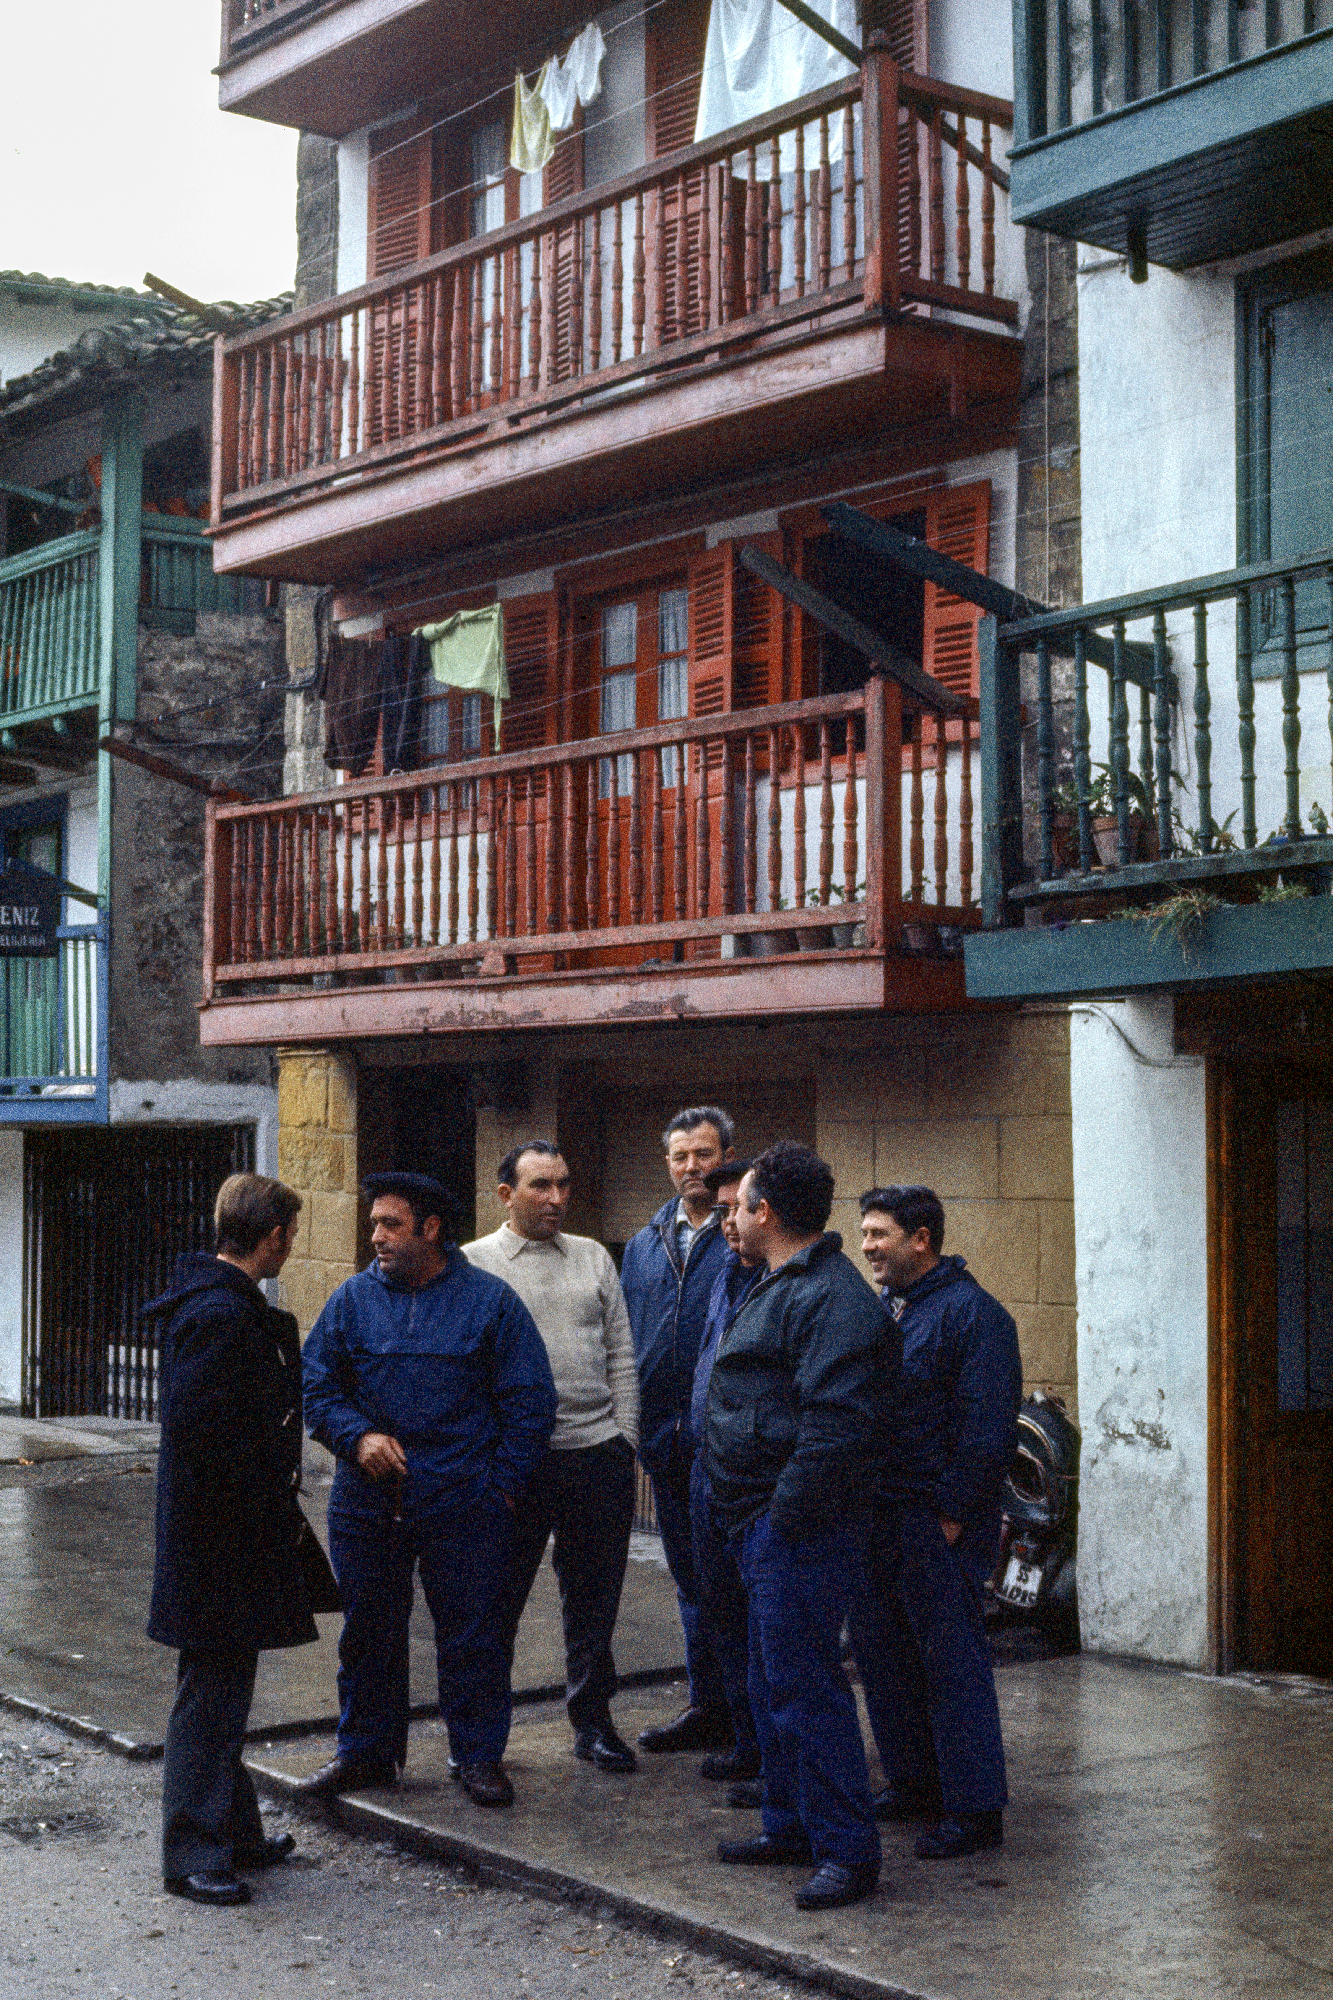 Spain 1974, Basque Country Euskai Sud. Hondarribia (Fuenterrabía in Spanish) a fishing town of 15,044 inhabitants located in the province of Guipúzcoa in the autonomous community of the Basque Country.